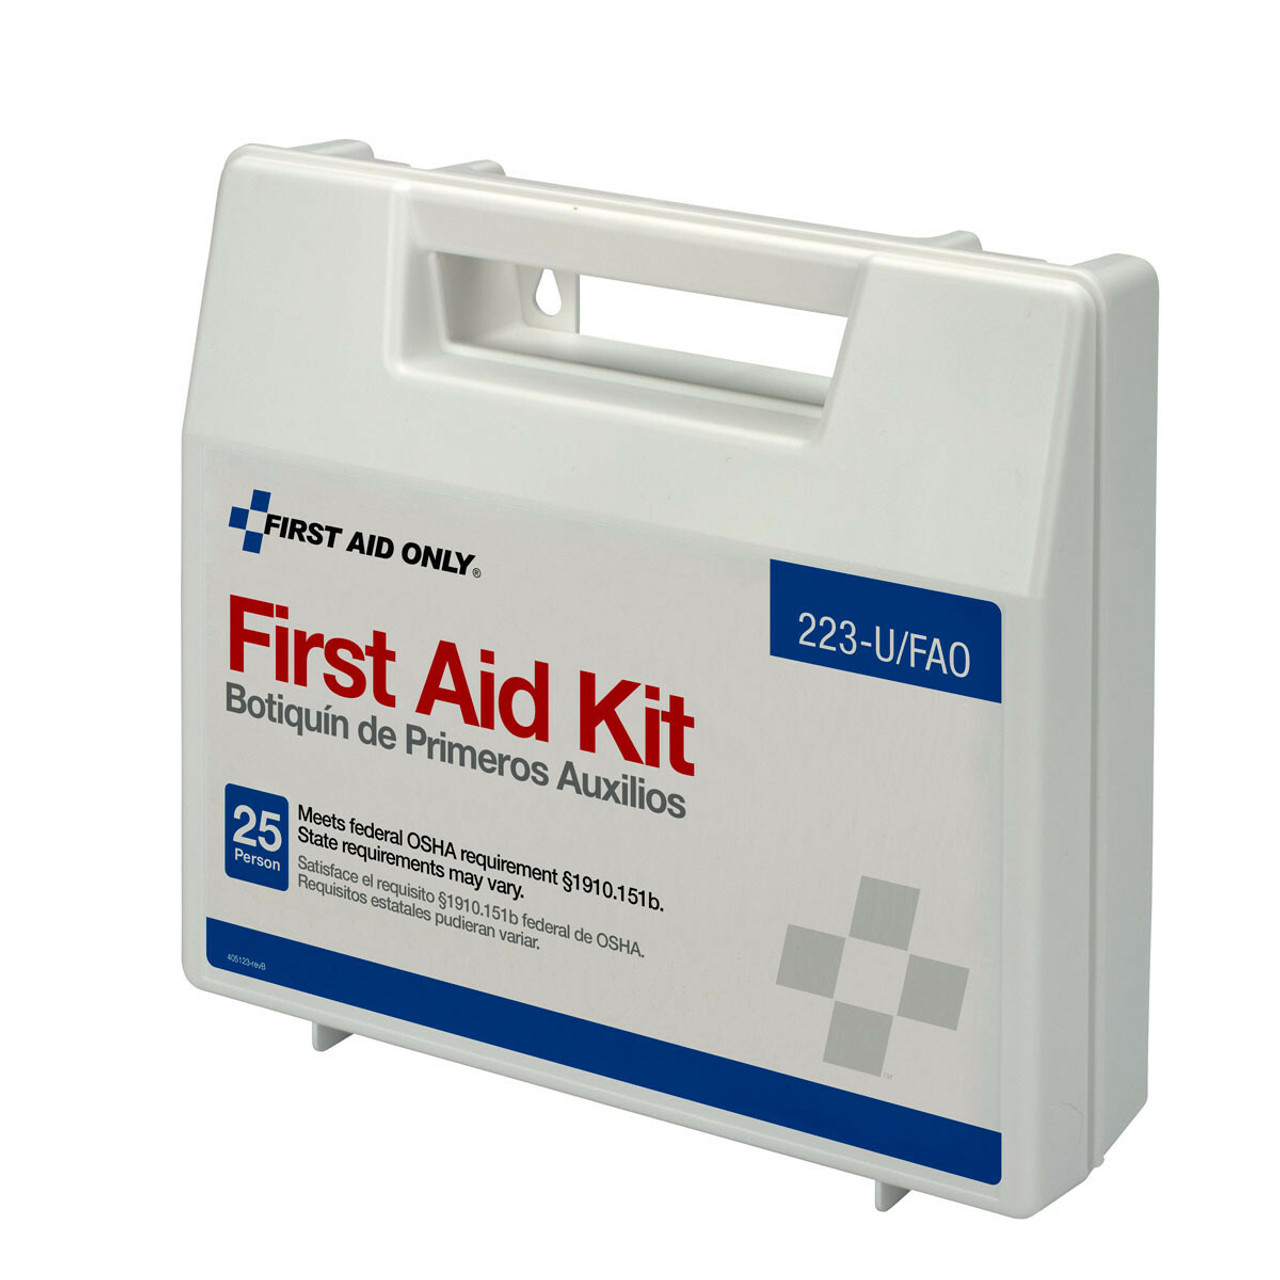 First Aid Only 223-U/FAO Wall-mount 25 Person First Aid Kit in Plastic  Carry Case